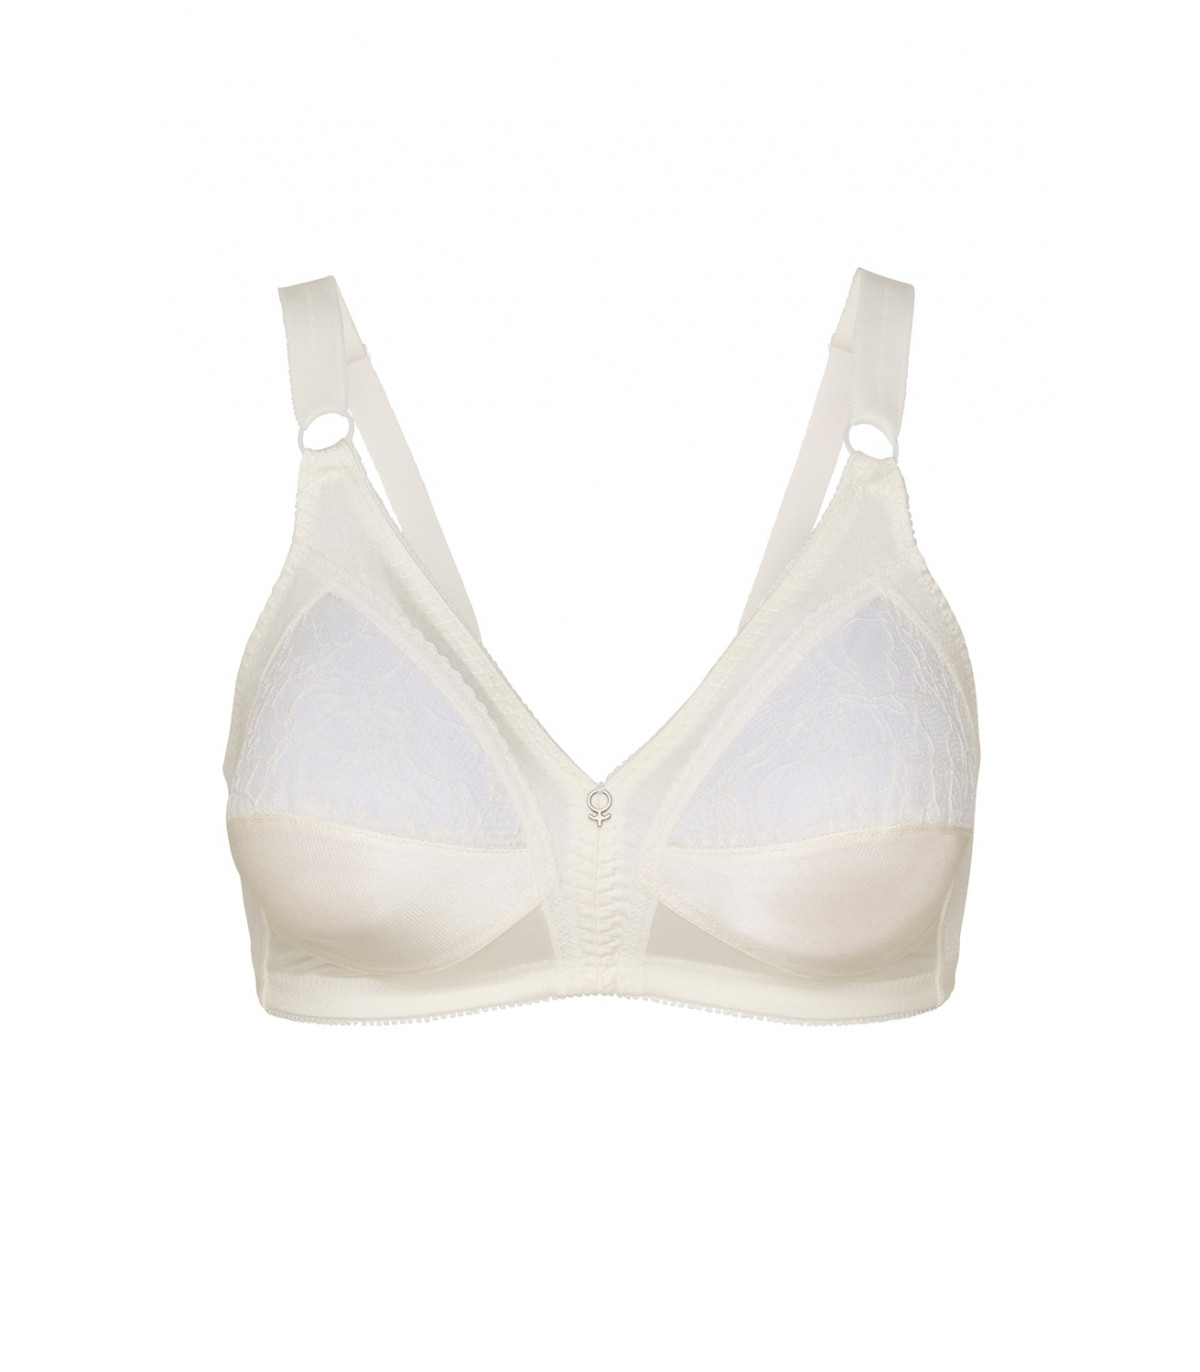 Lace non-wired bra that supports the breasts properly